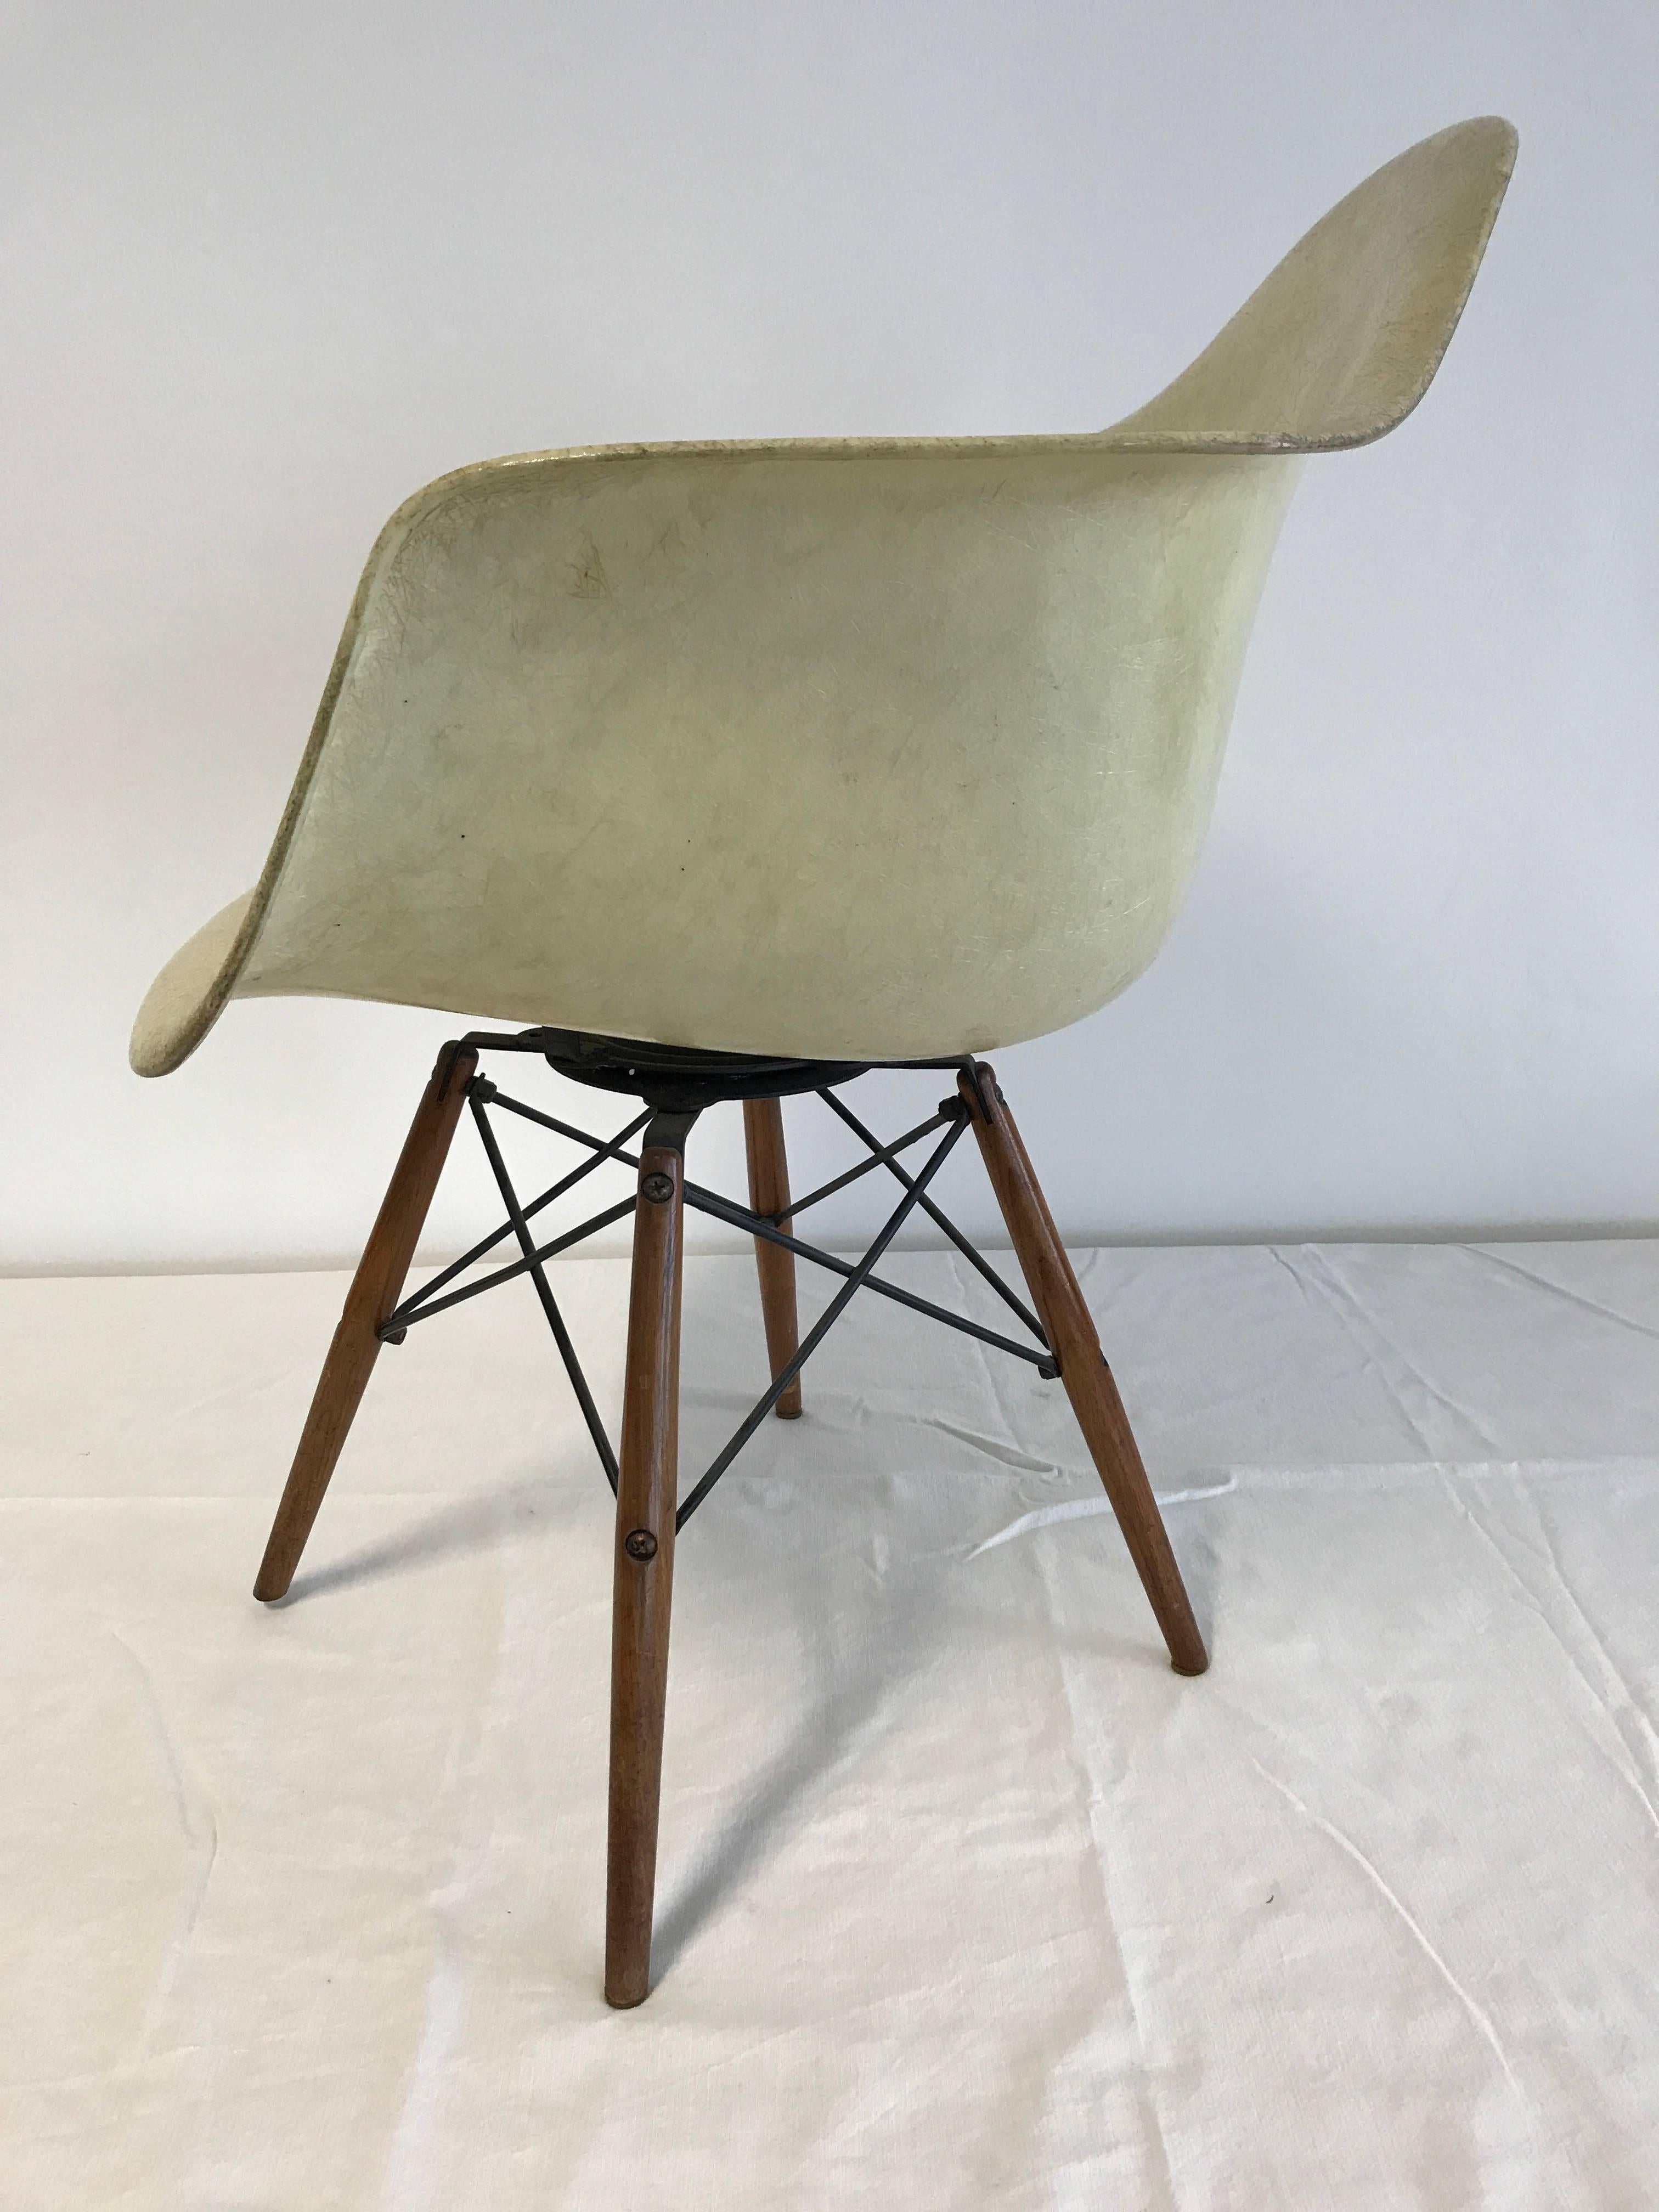 First production/first generation 1949-1950 Zenith Herman Miller/Charles Eames PAW Rope Swivel chair in color lemon yellow parchment/dowel legs in walnut/all original parts/the awesome dowel base reads Seng Chicago on the metal portion/fibre glass